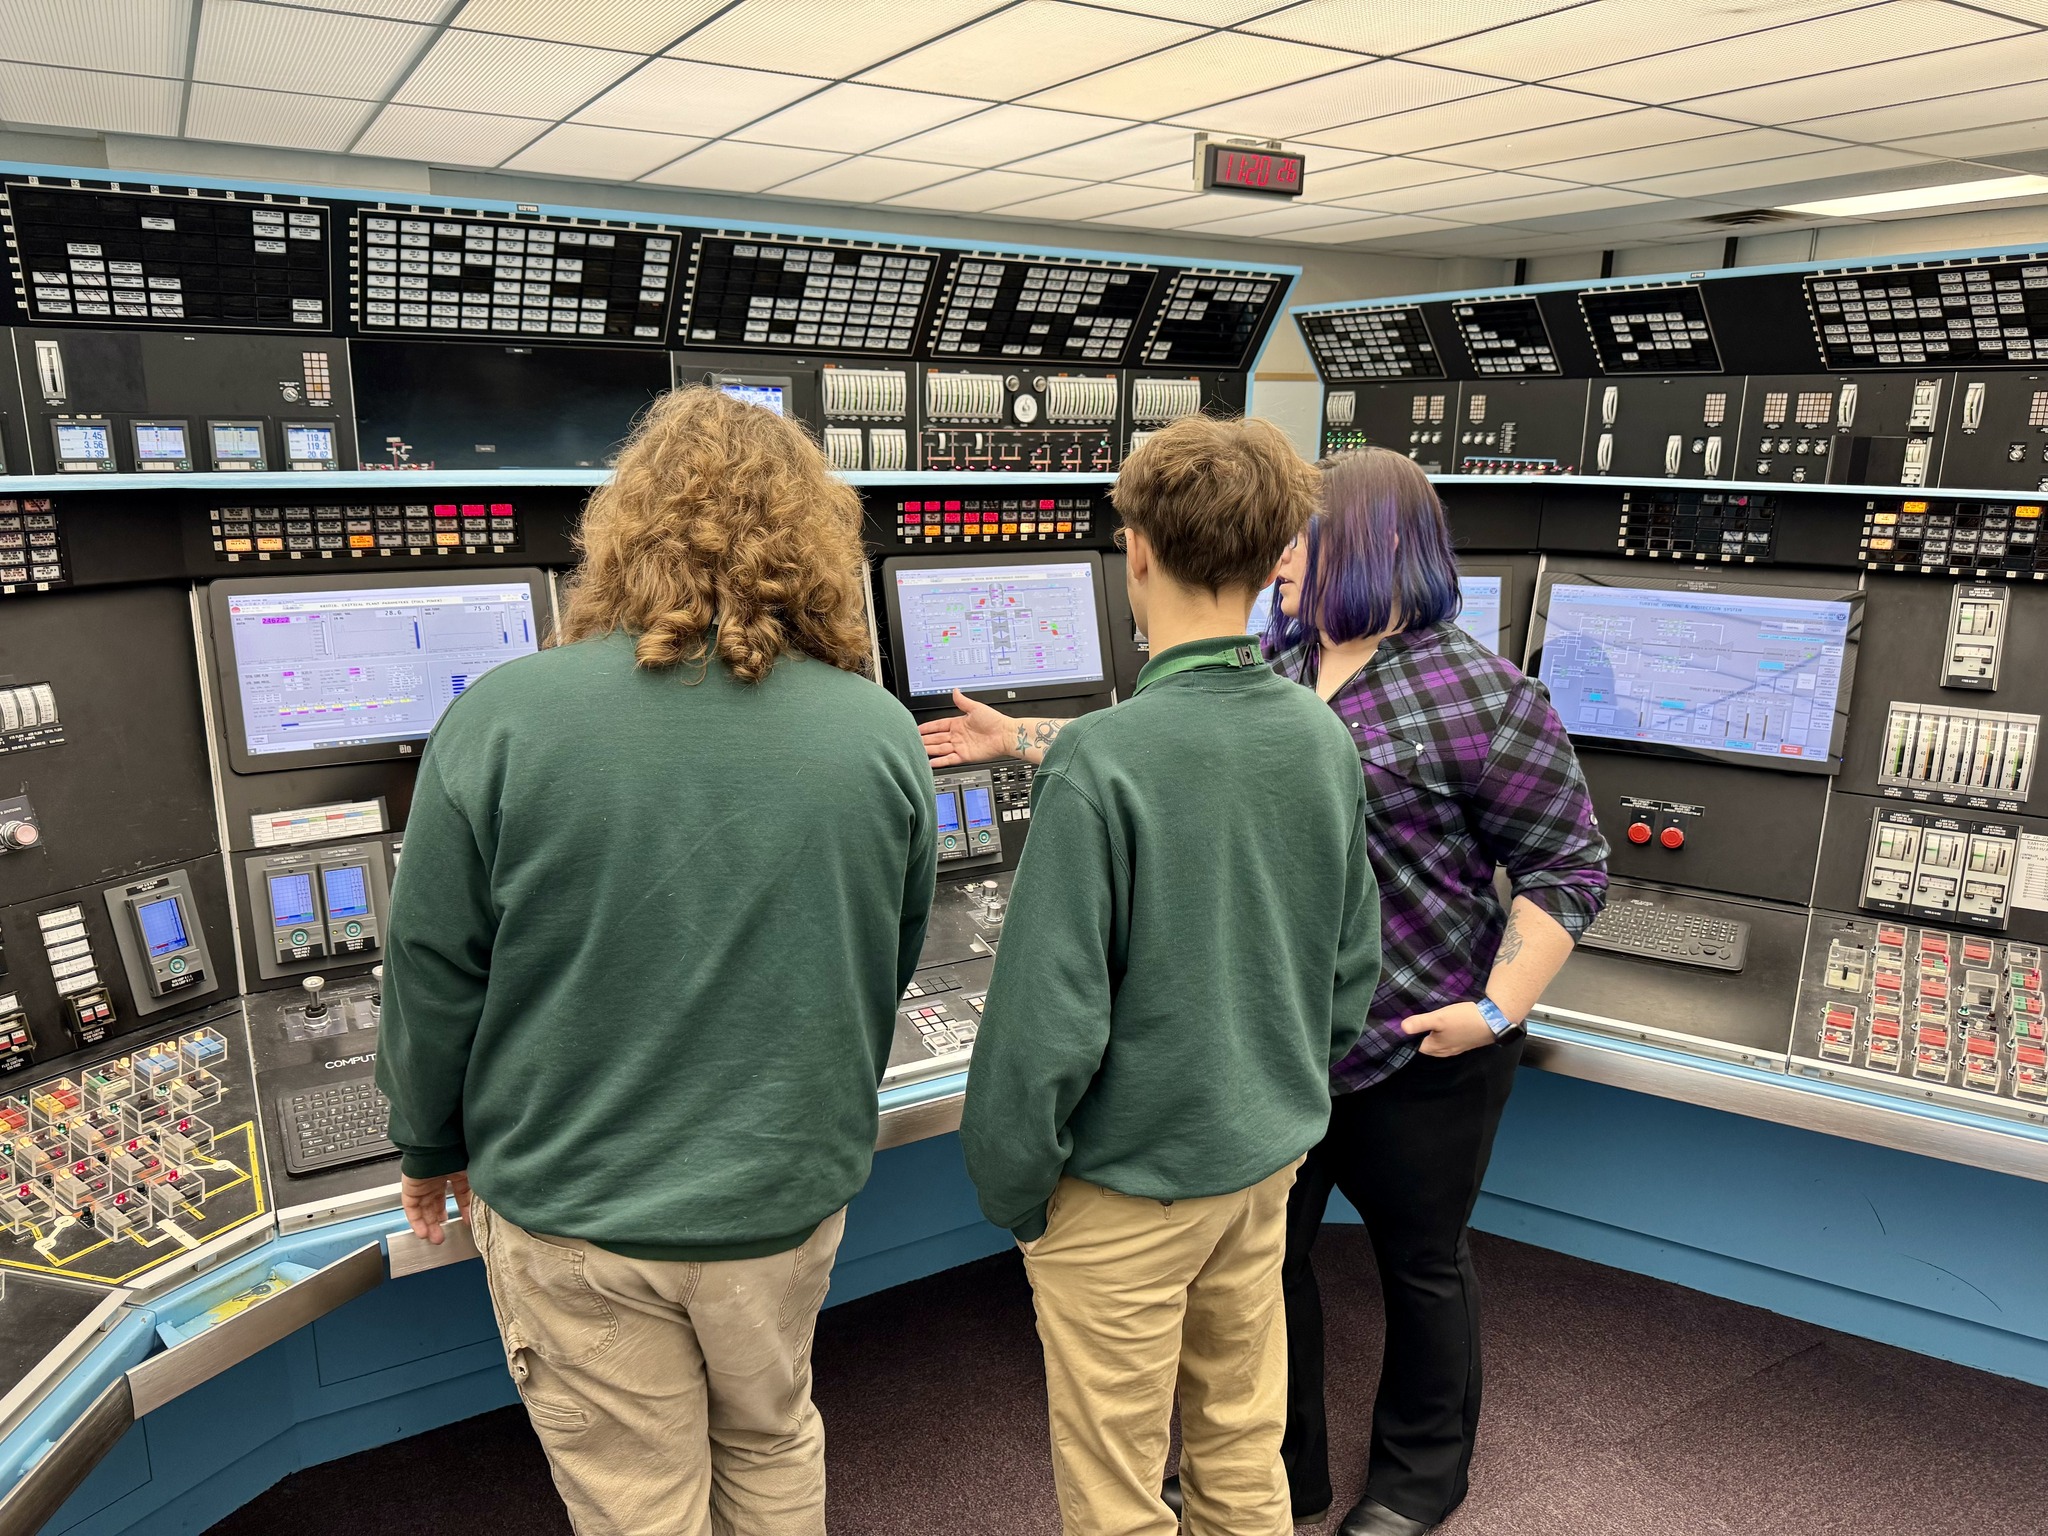 Students from Livonia High School Jobs for America's Graduates program joined the River Bend team to learn about nuclear power and the different careers onsite.